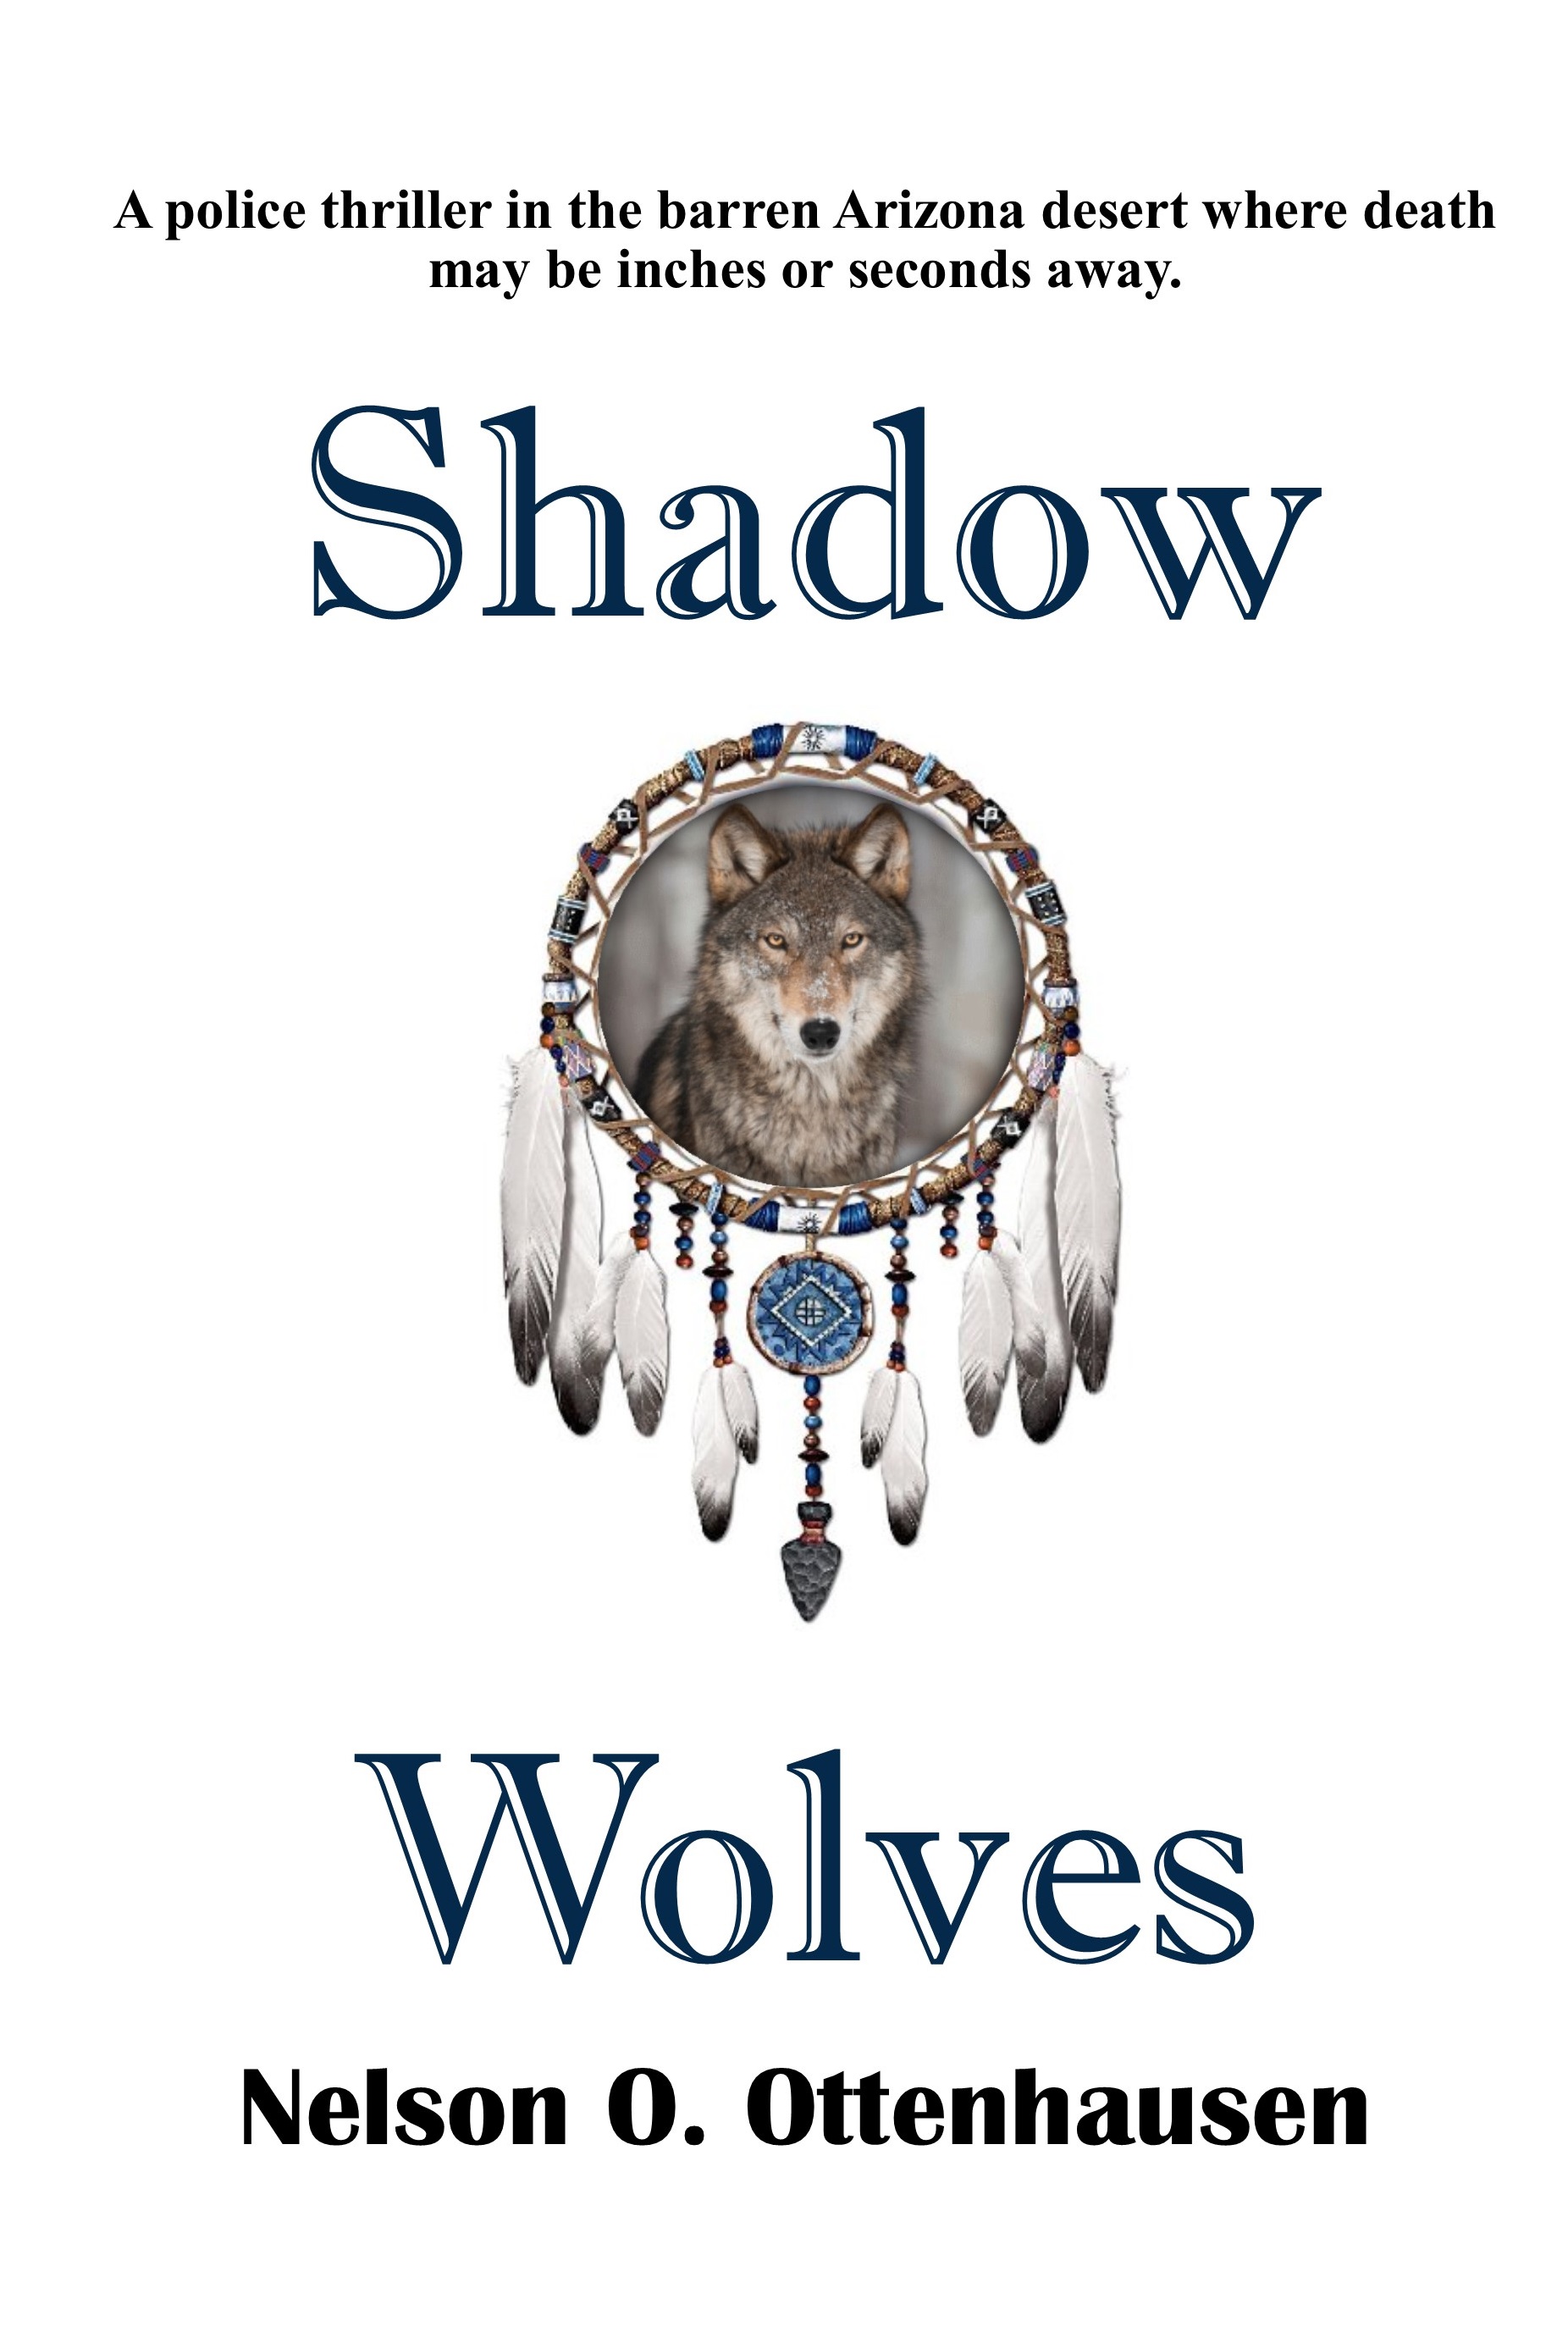 Thumbnailcovers/ShadowWolvesFrontCover.jpg